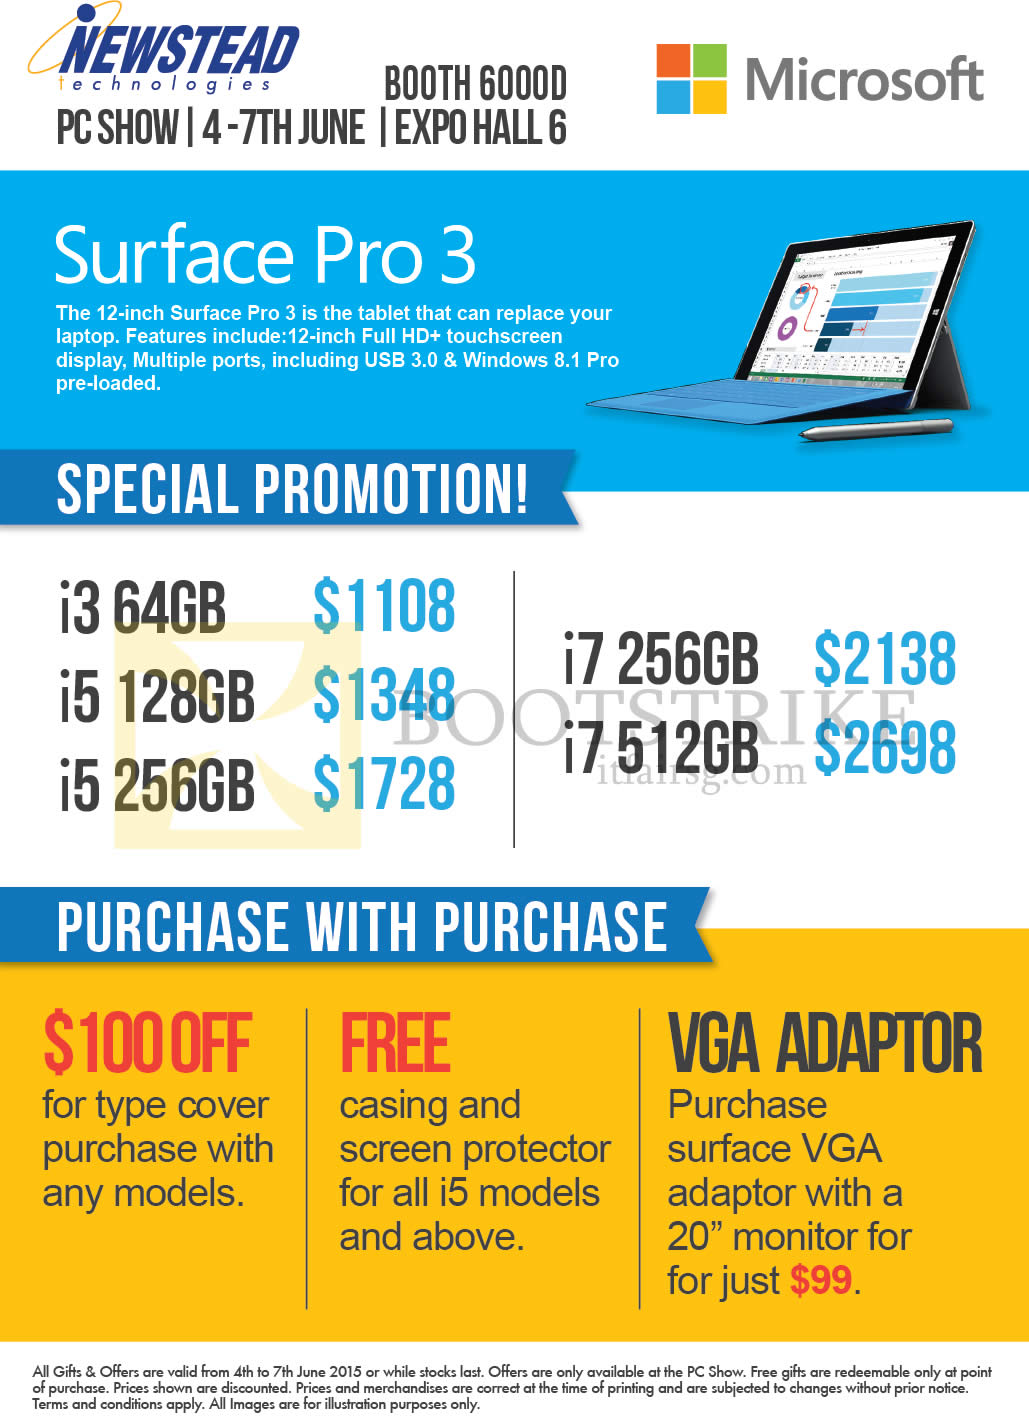 PC SHOW 2015 price list image brochure of Microsoft Newstead Surface Pro 3 Tablet